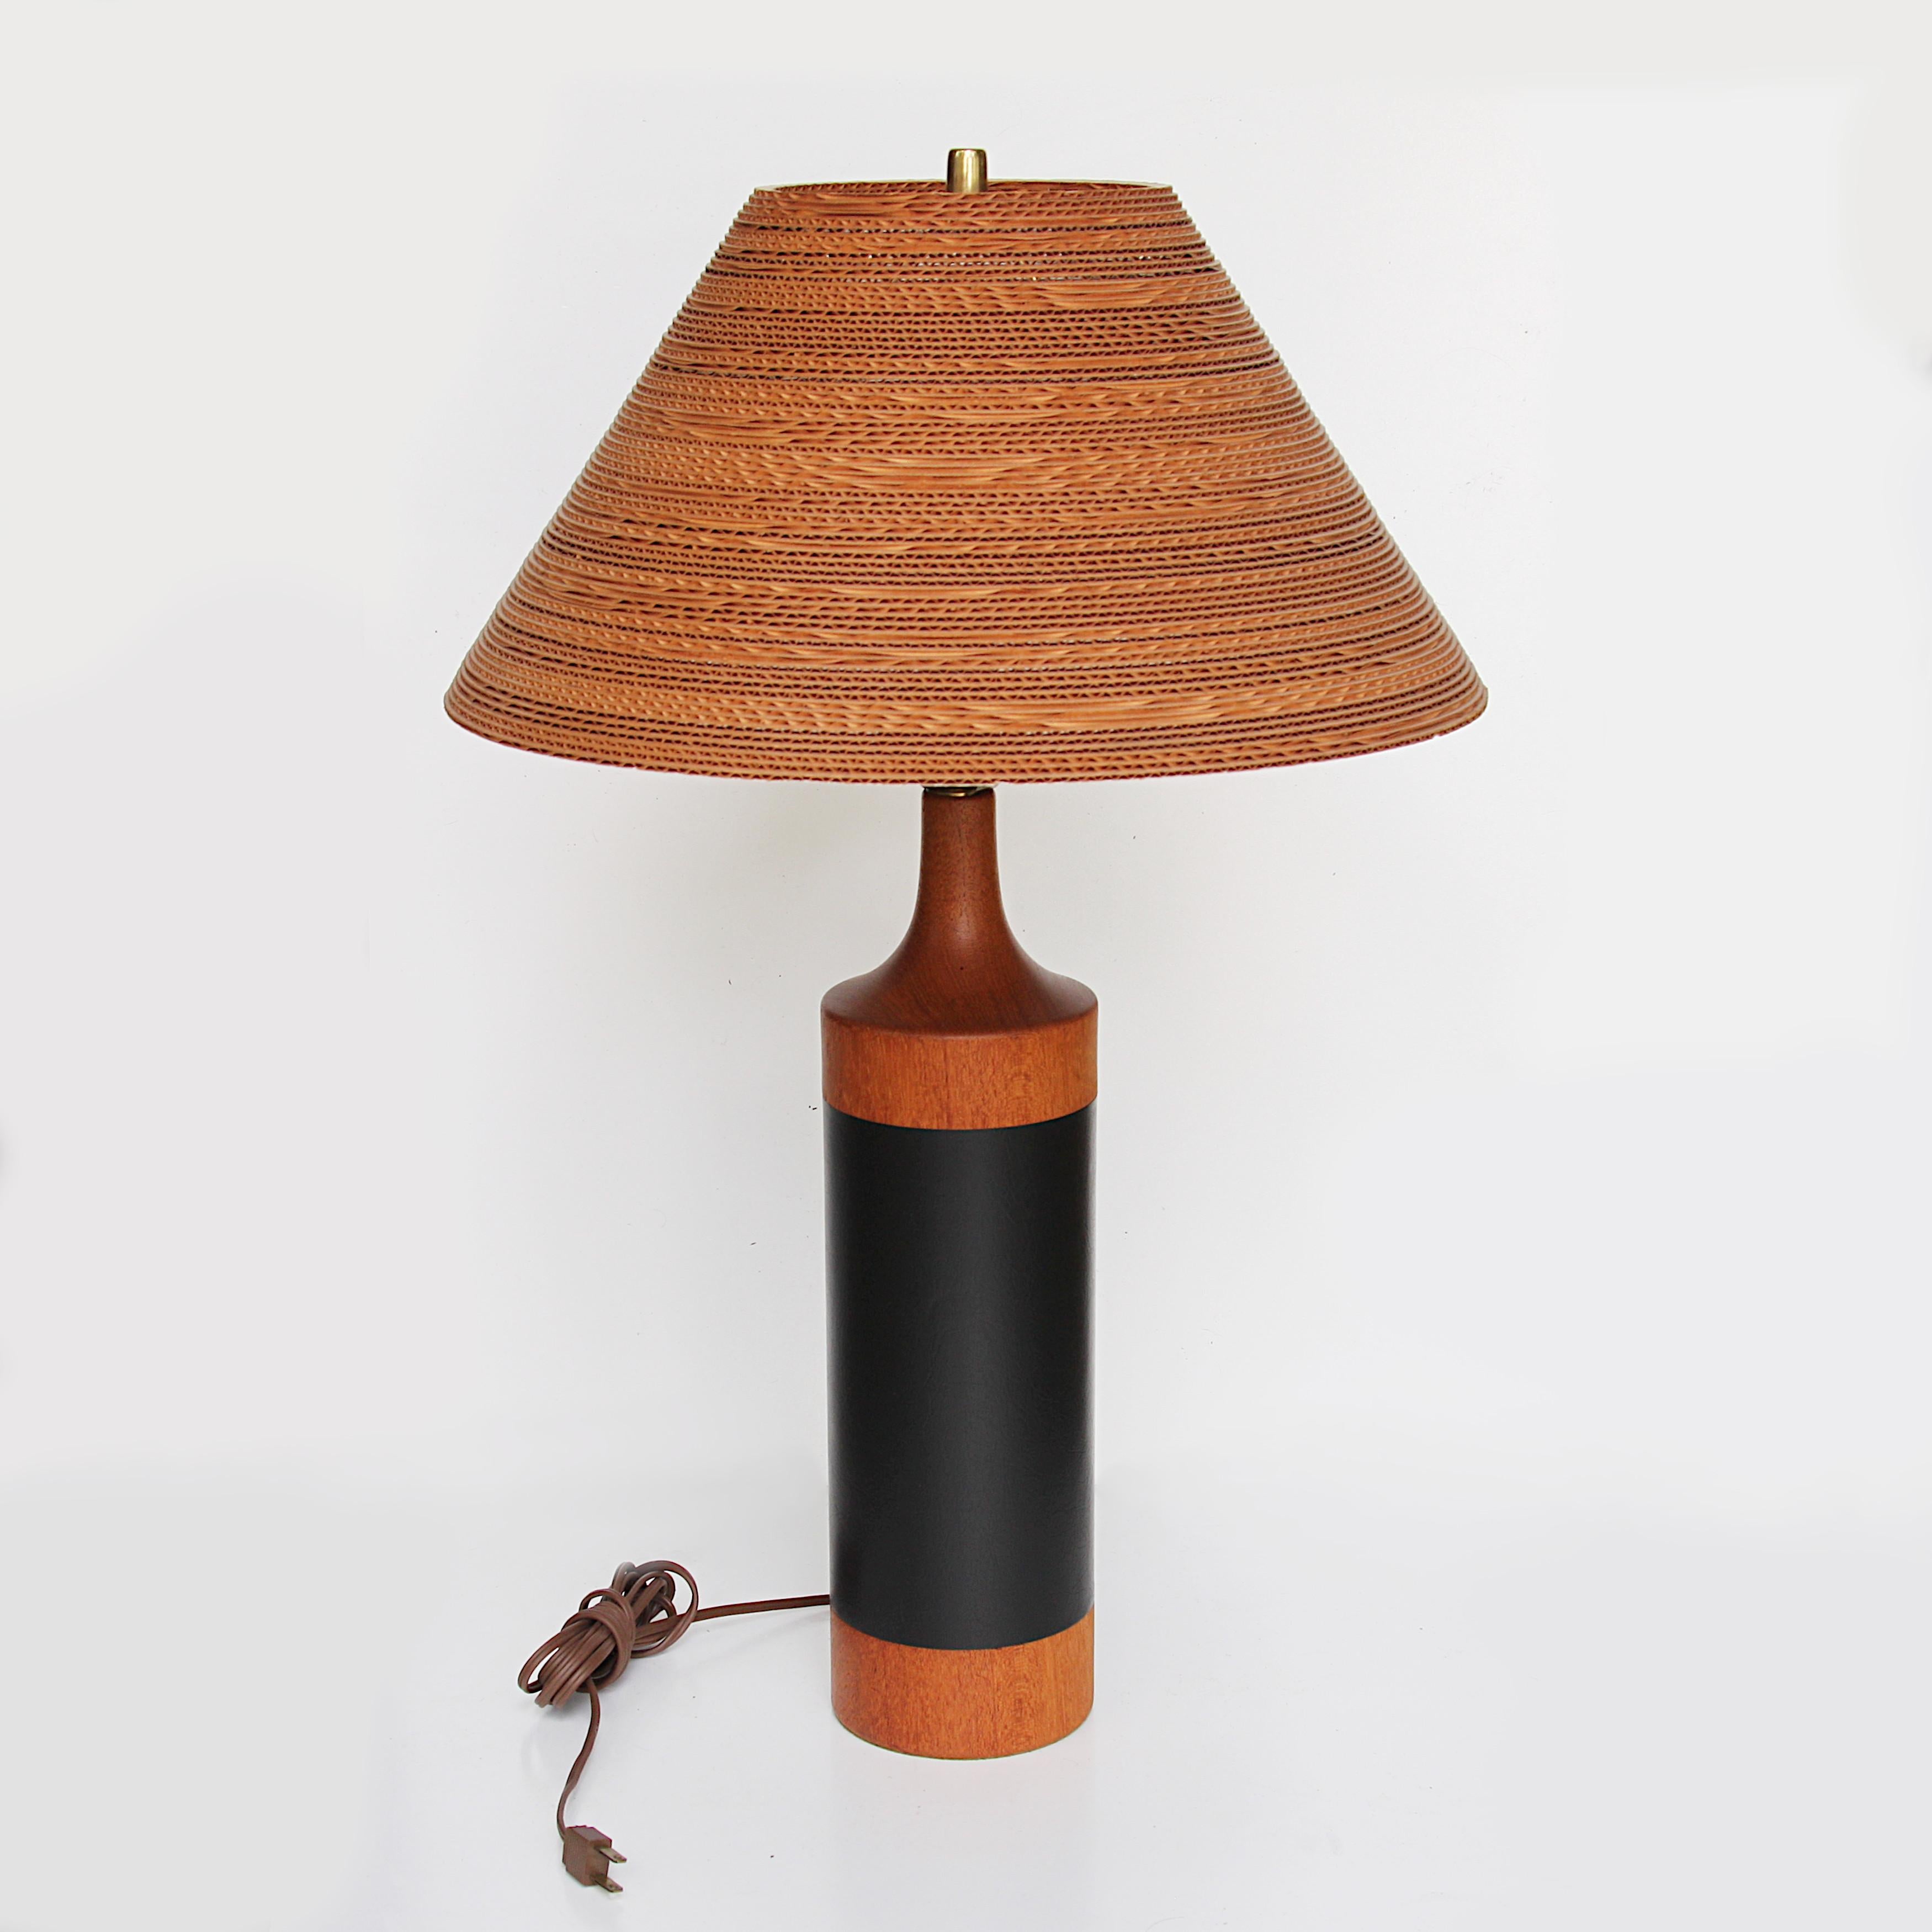 Unique 1960's Danish Modern table lamp. Lamp features a solid teak body with black, inset leather-wrap. The shade is a period, corrugated cardboard shade that complements the lamp beautifully (16.5